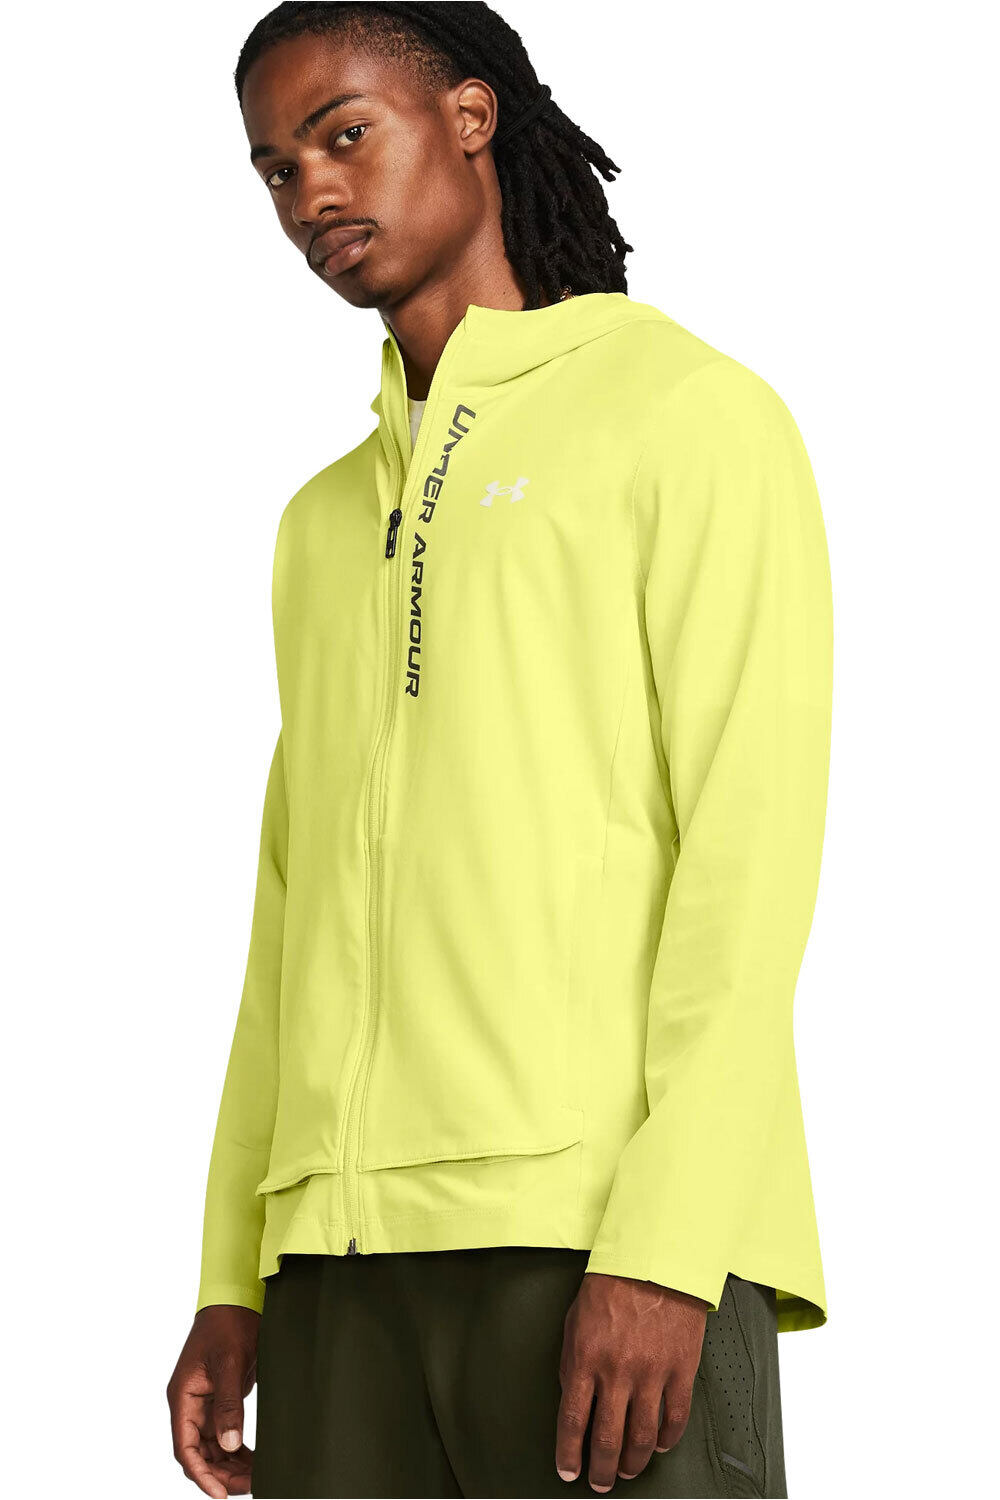 Under Armour CHAQUETA RUNNING HOMBRE OUTRUN THE STORM JACKET vista frontal